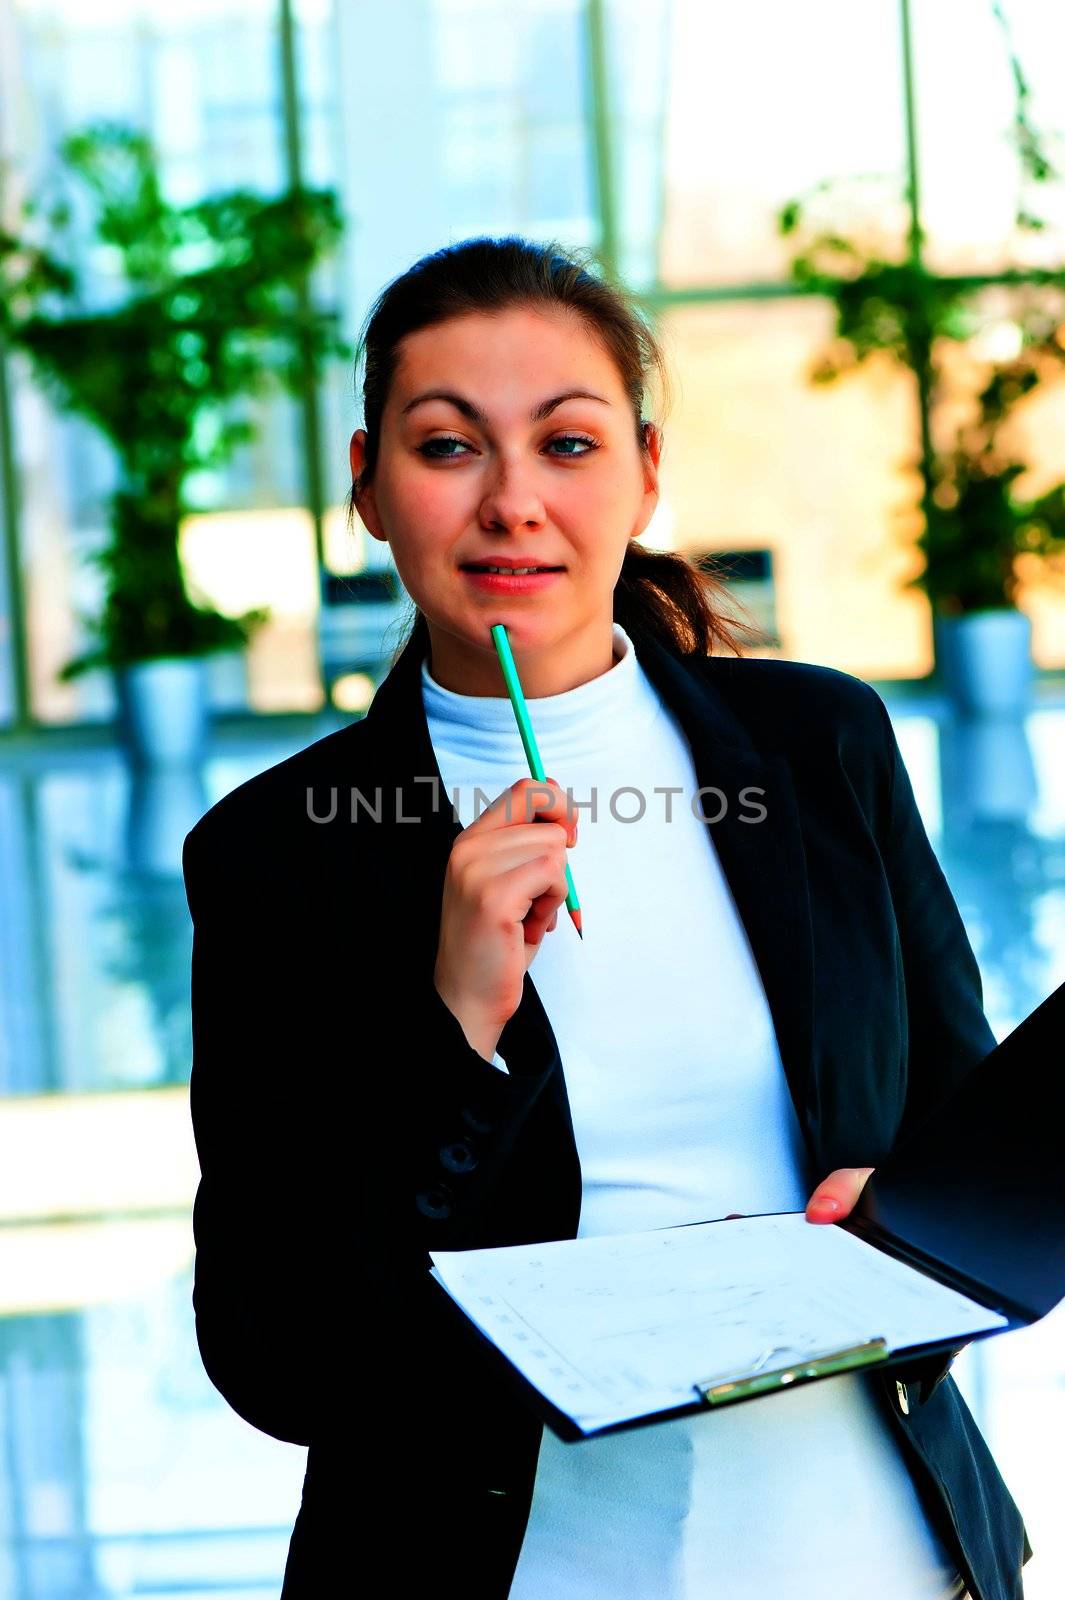 Young brunette woman in business suit pondered over the offer